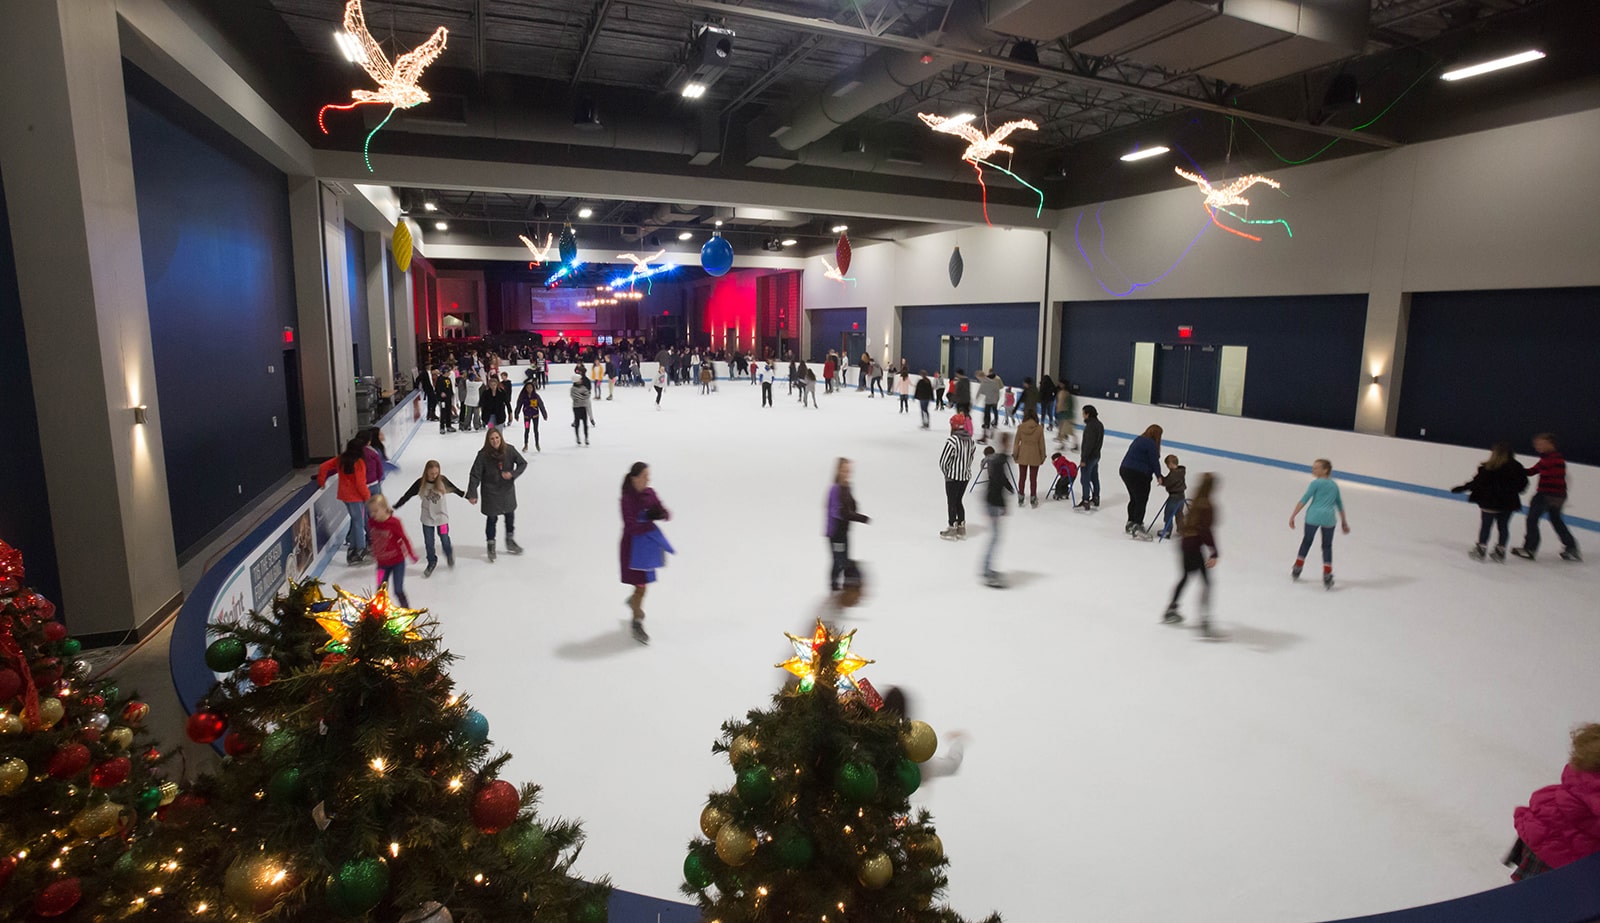 The Woodlands Ice Rink brings plenty of holiday family fun.